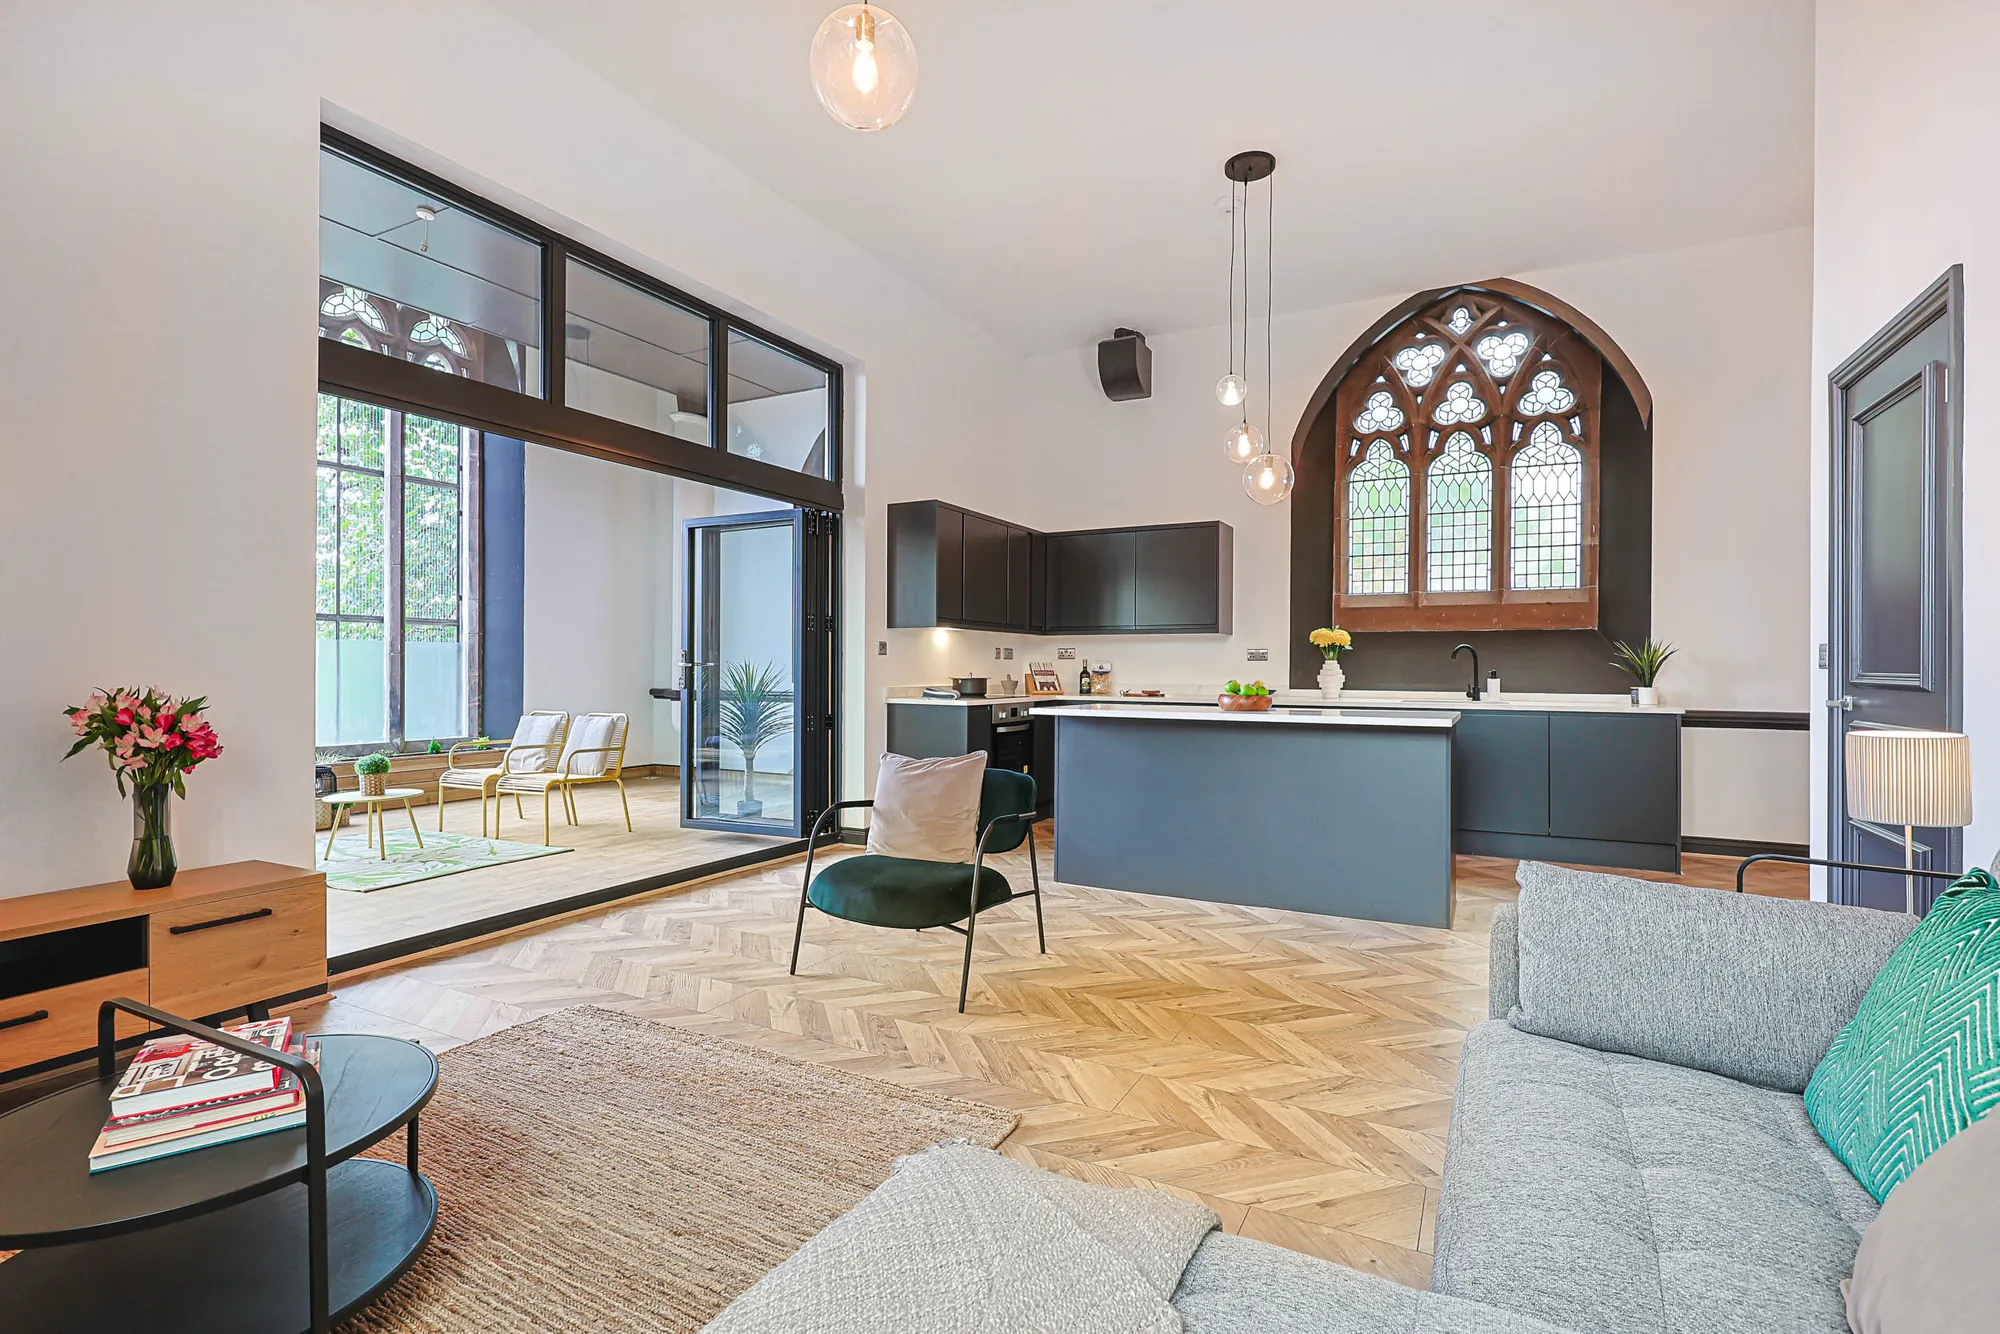 Welcome to this unique and incredibly charming converted church, located in the heart of South Liverpool. This one-of-a-kind development offers a truly special living experience that you won't find anywhere else, with each apartment being beautifully unique and with a personality all of their own.